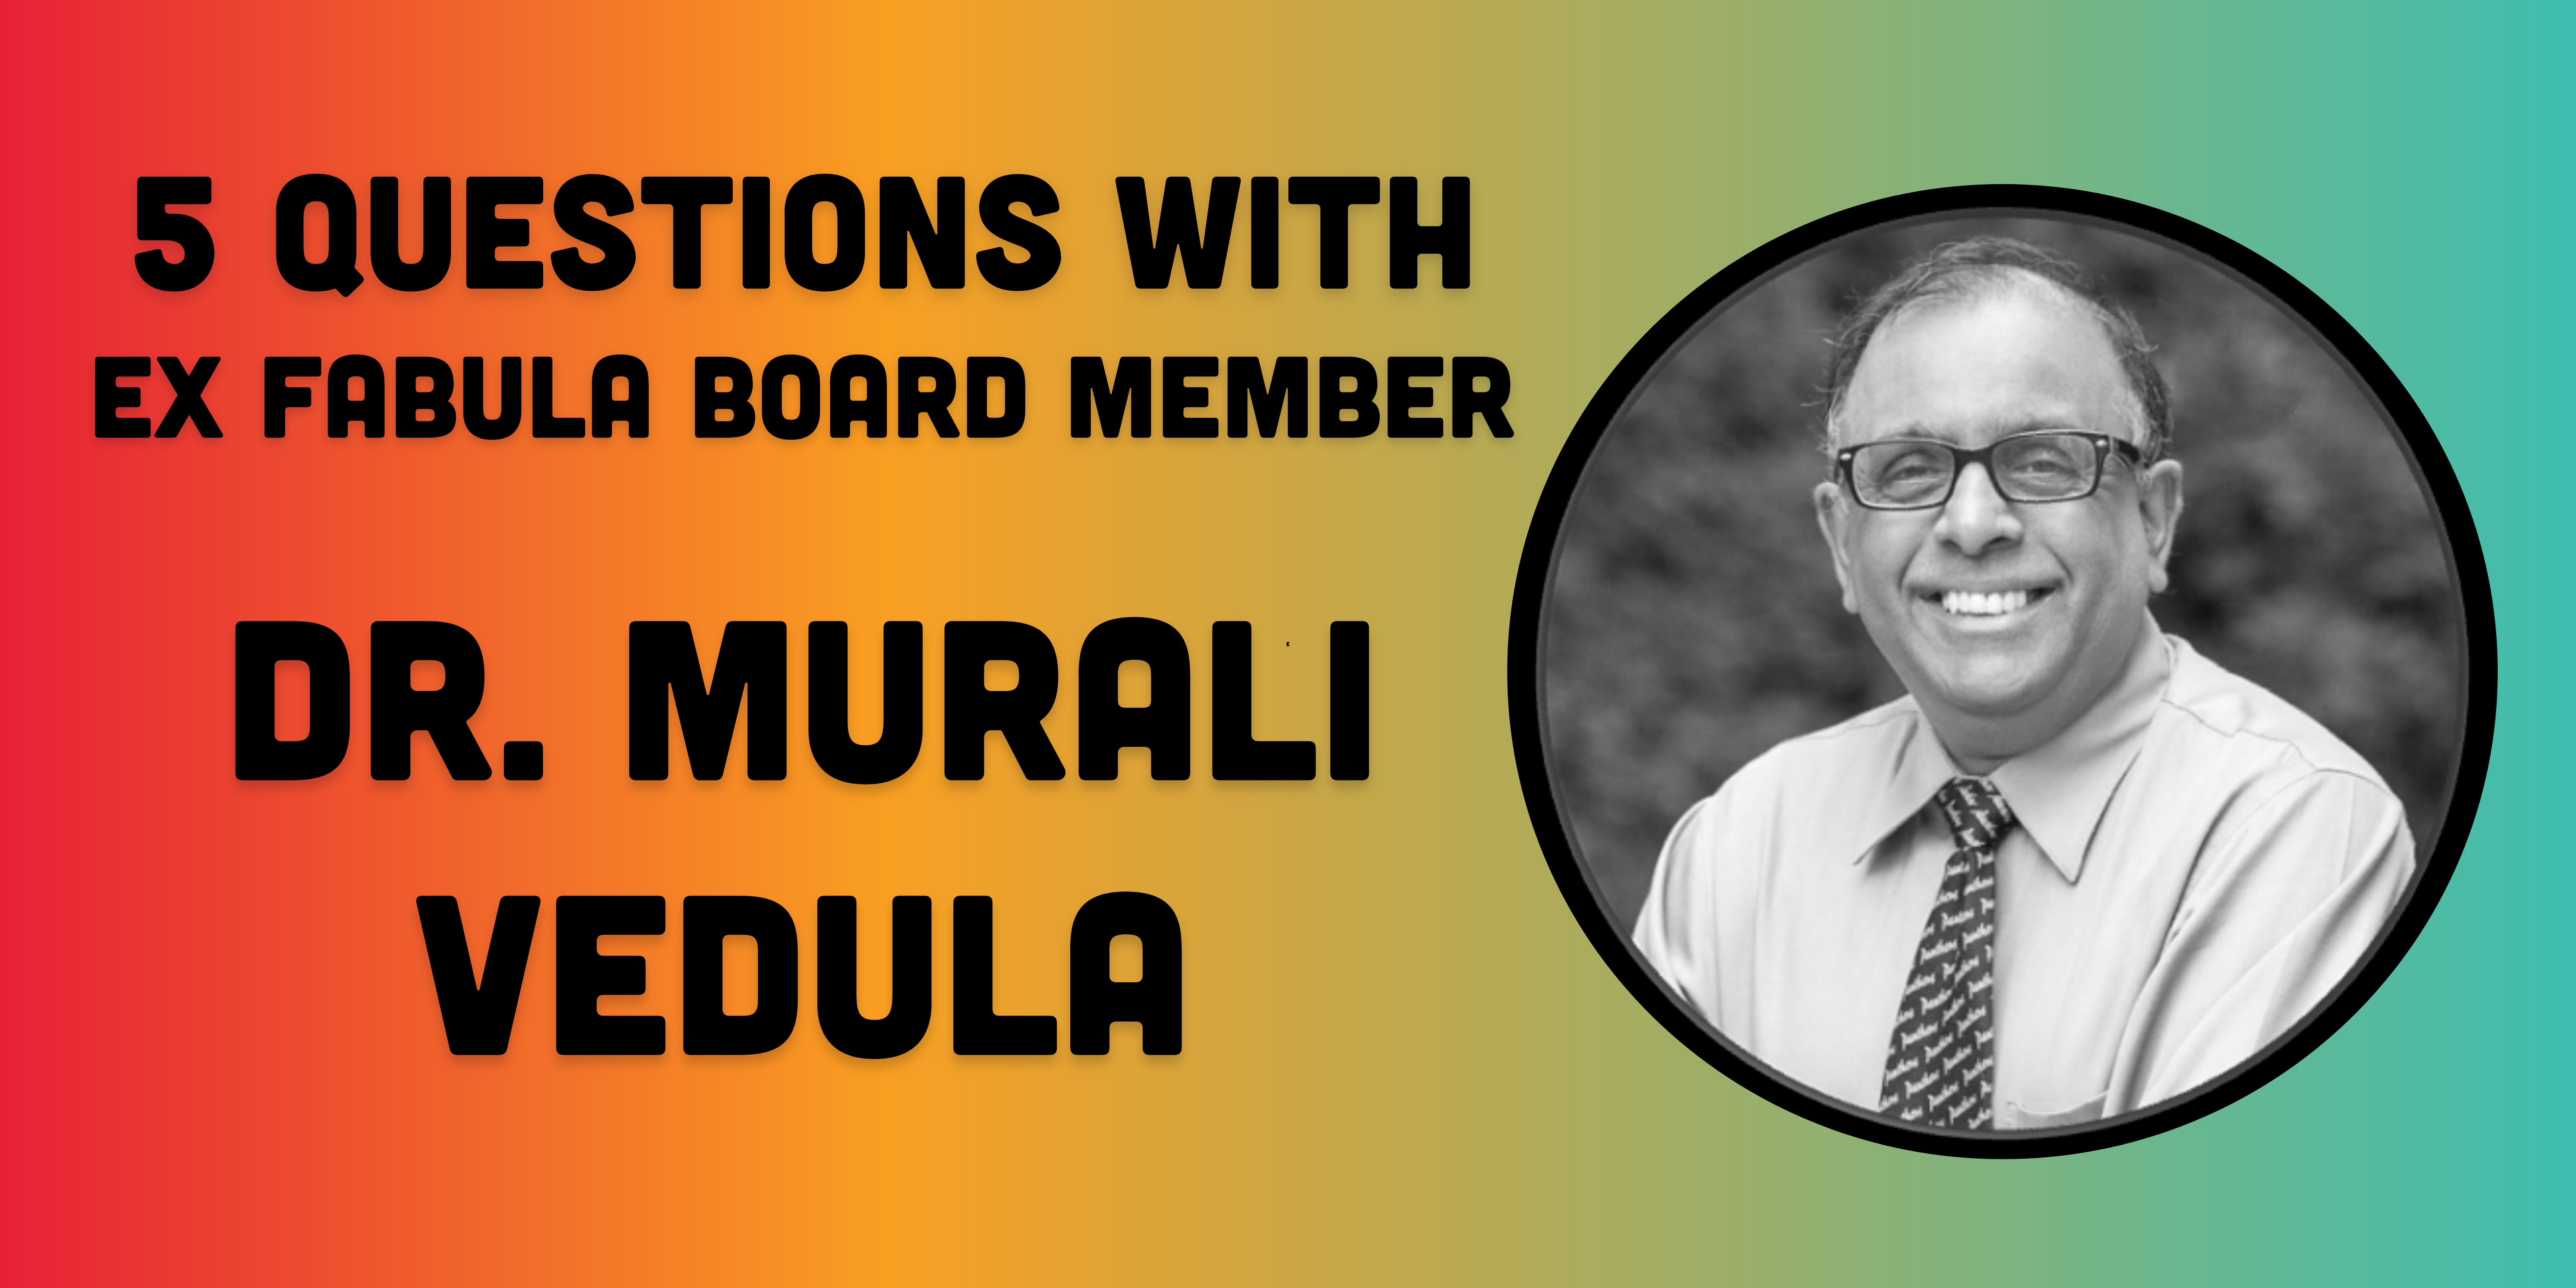 5 questions with Ex Fabula board member Dr. Murali Vedula next to black and white headshot